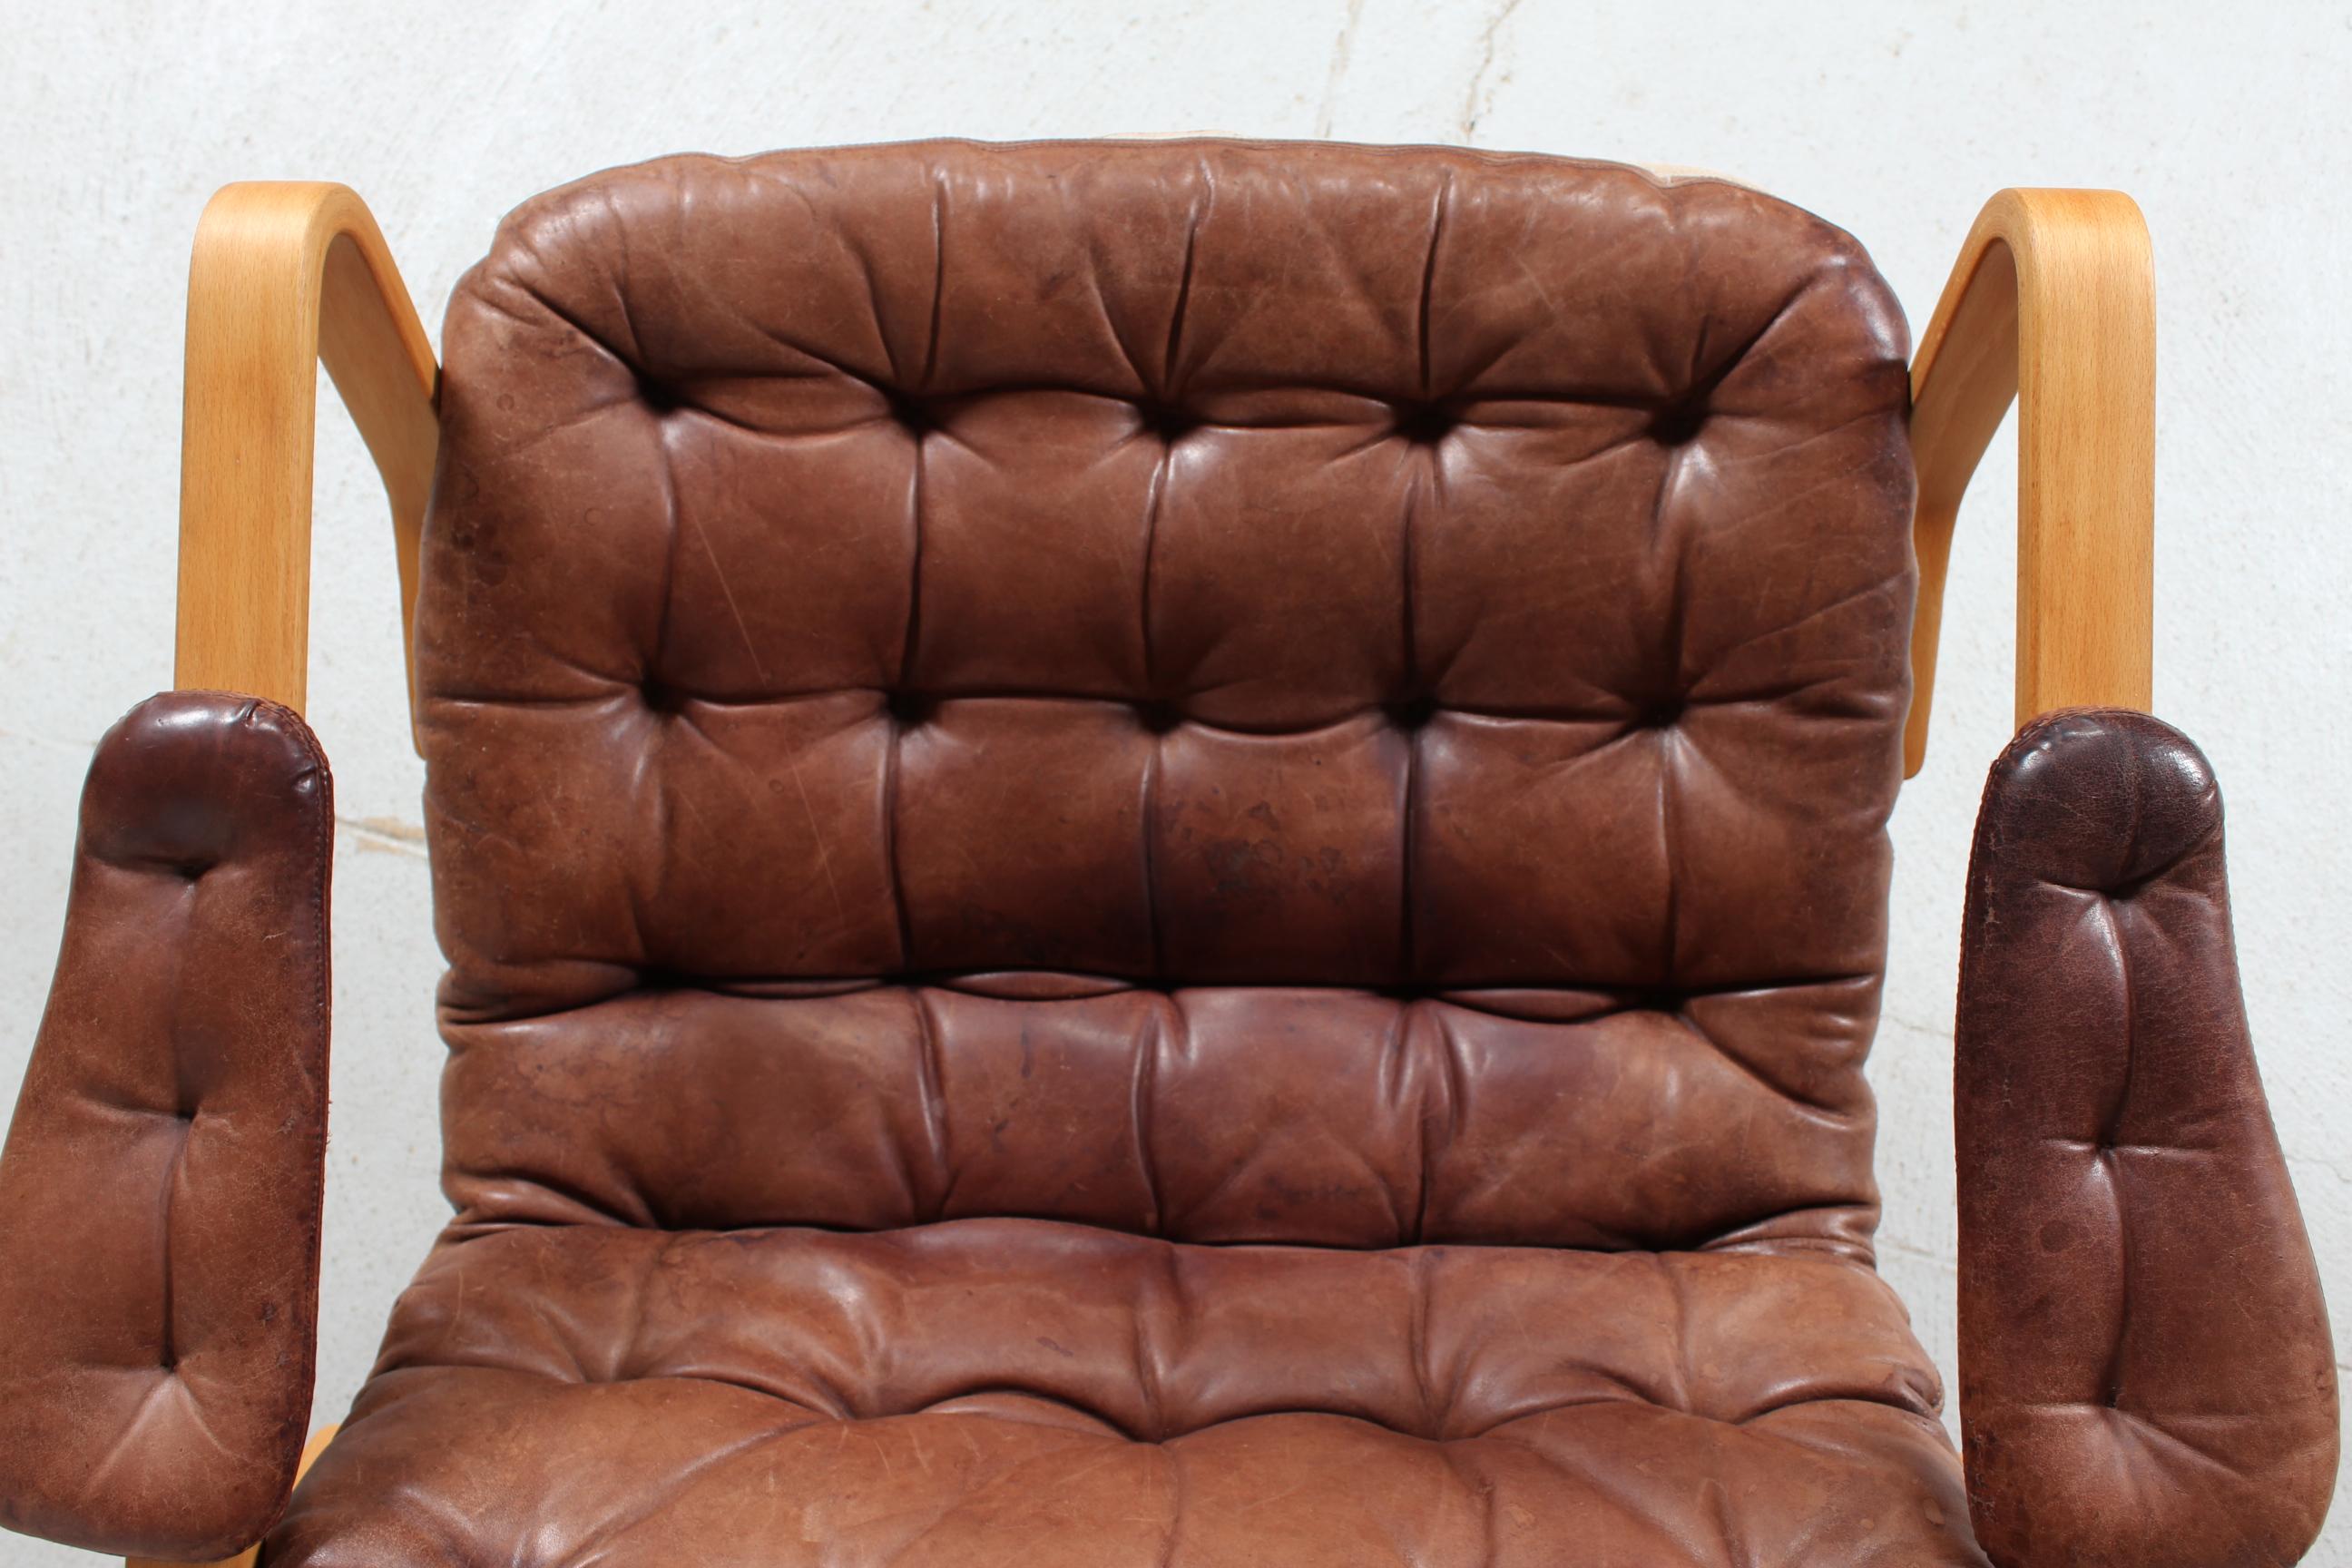 Swedish Sam Larsson Mona Roto Swivel Chair Beech and Cognac Colored Leather 1970 For Sale 6